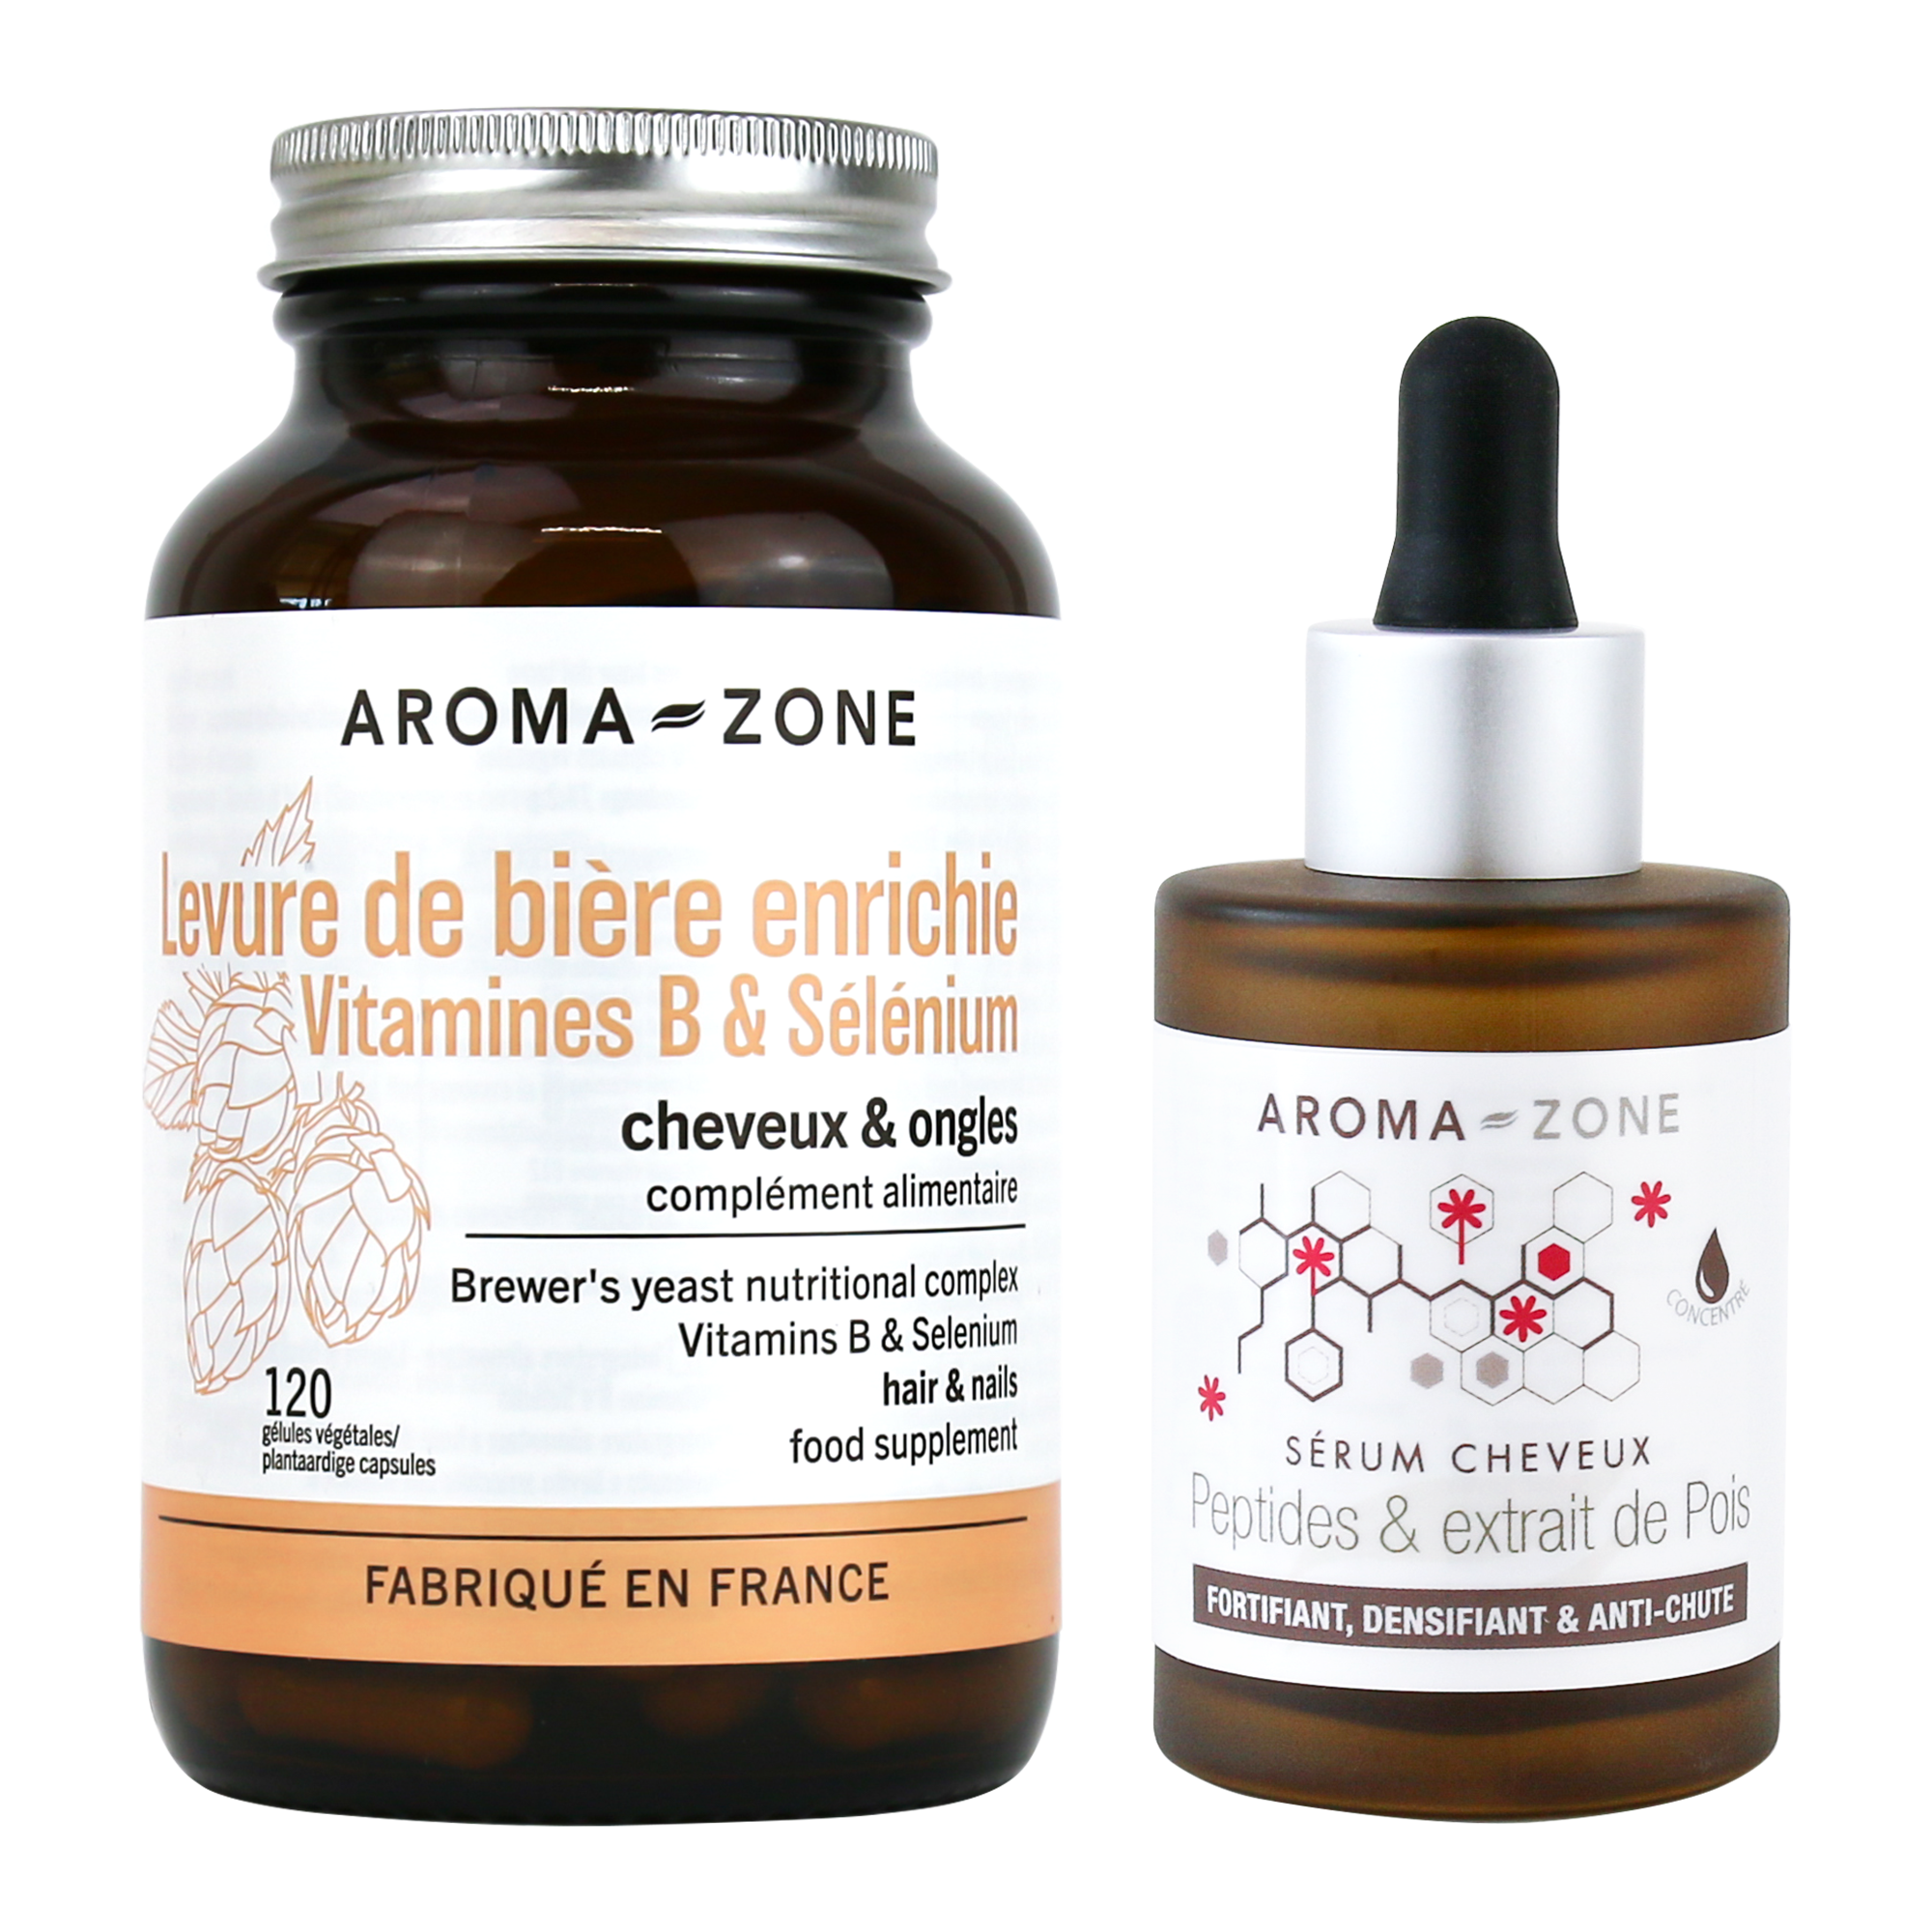 Aroma-Zone vaut son pesant d'or